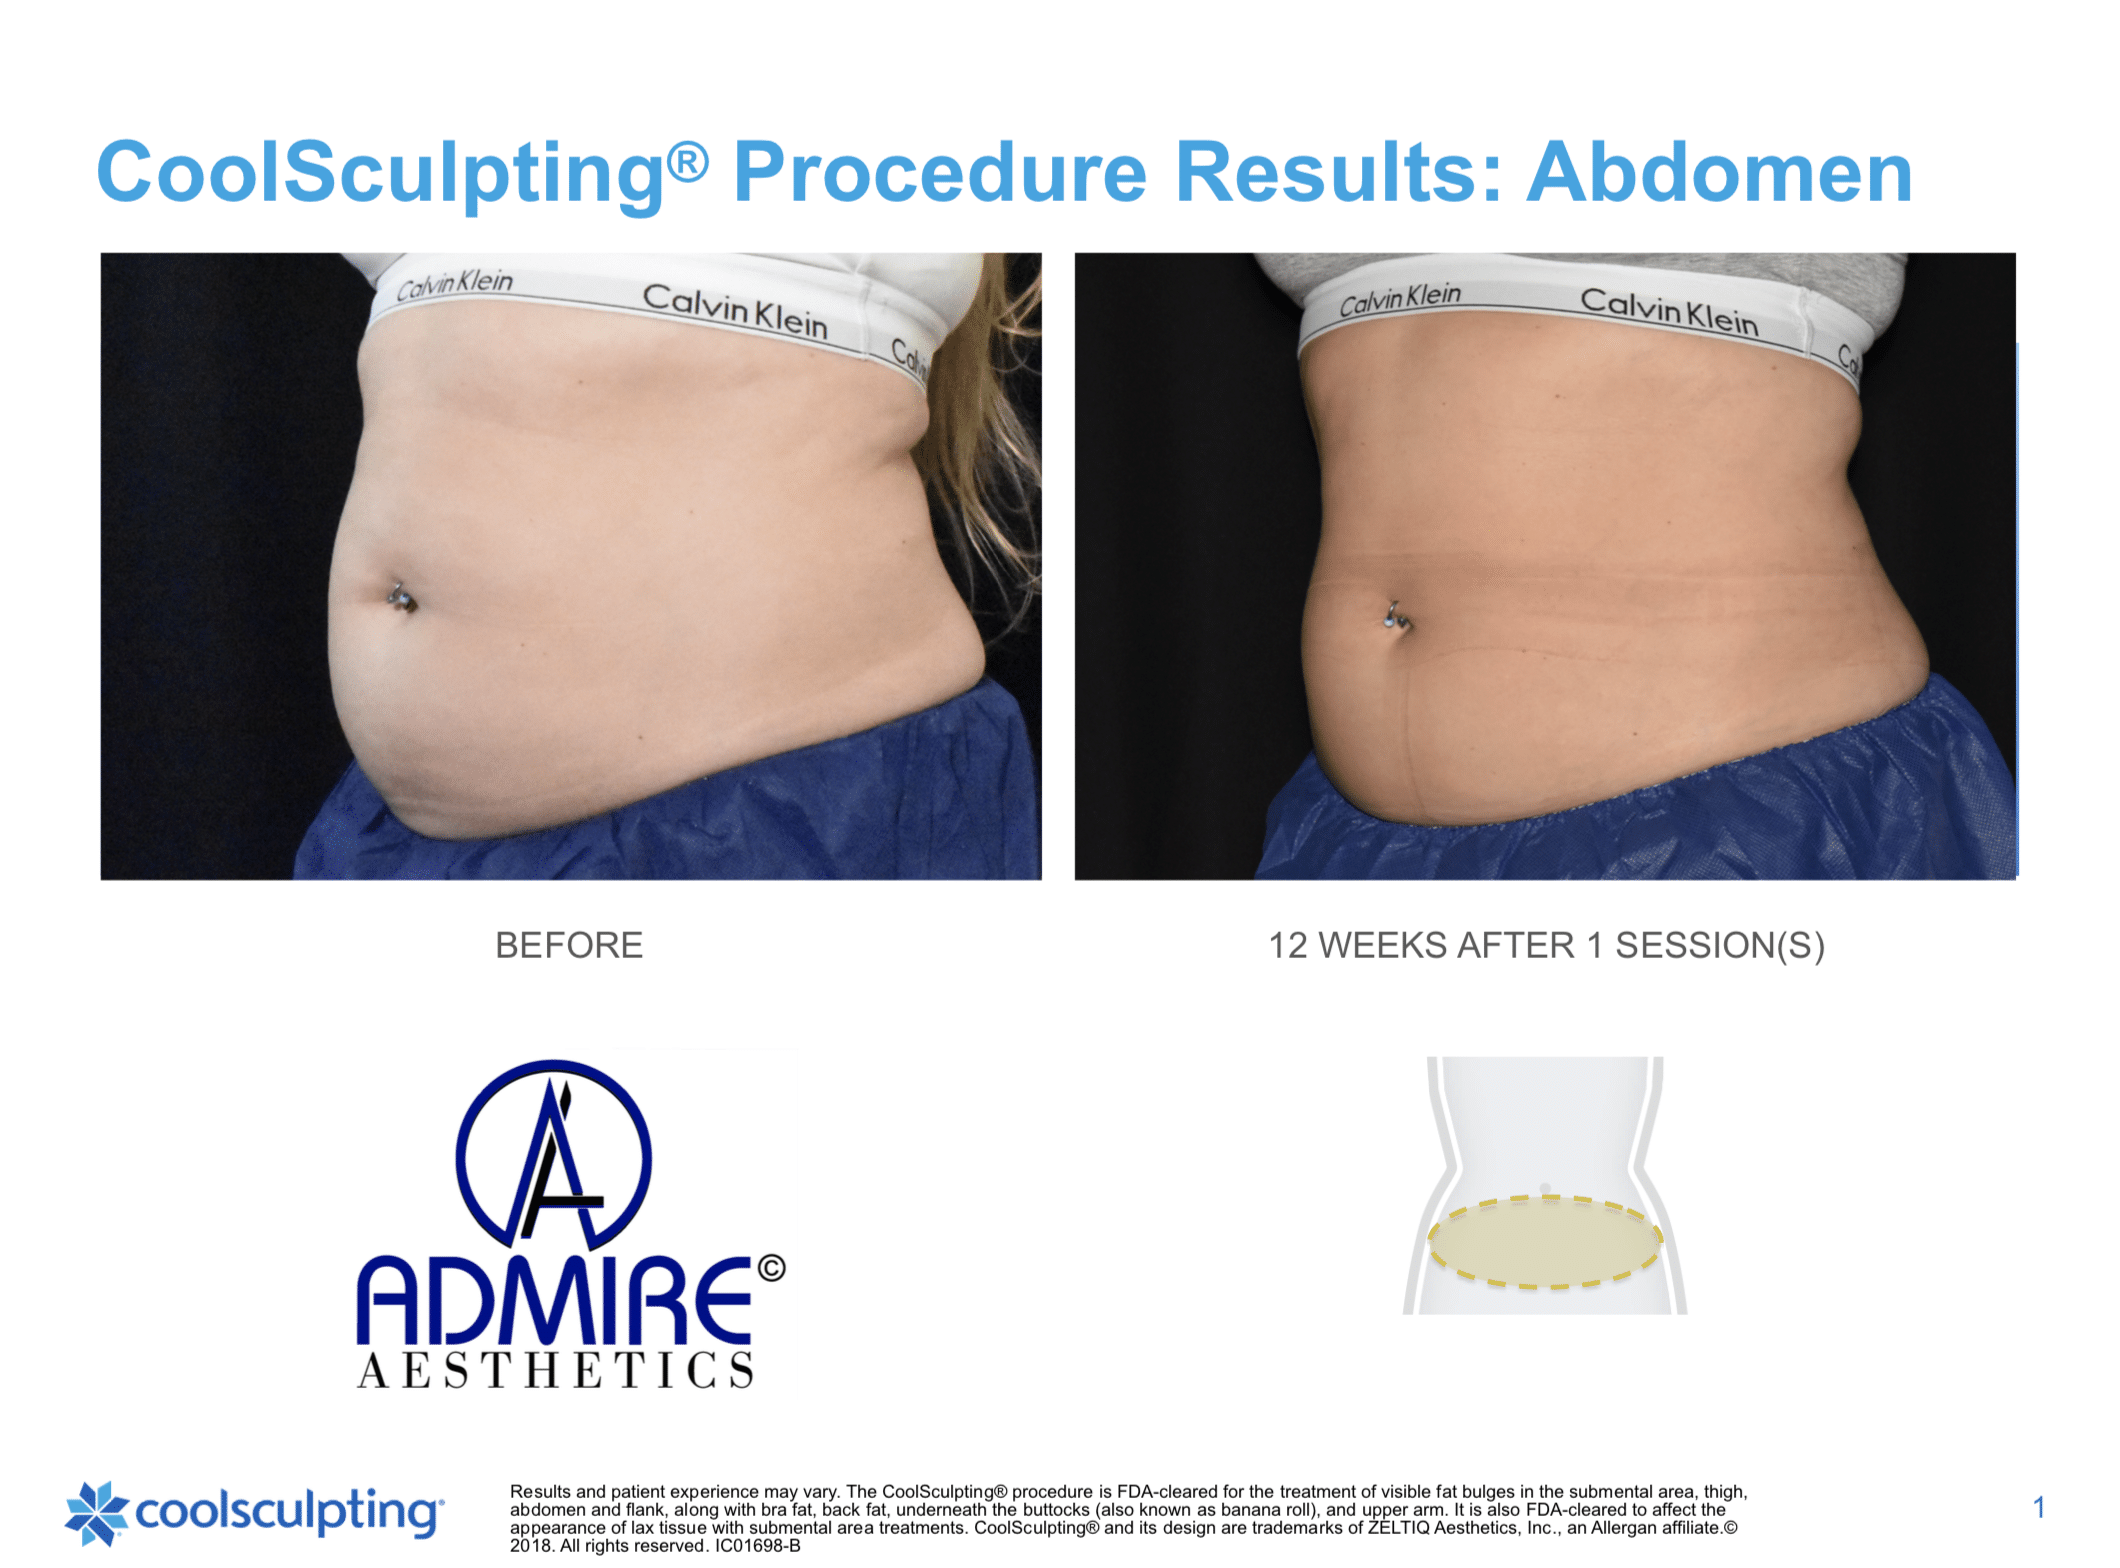 Womans abdomen before and after coolsculpting elite treatment at Admire Aesthetics in Medford, OR.